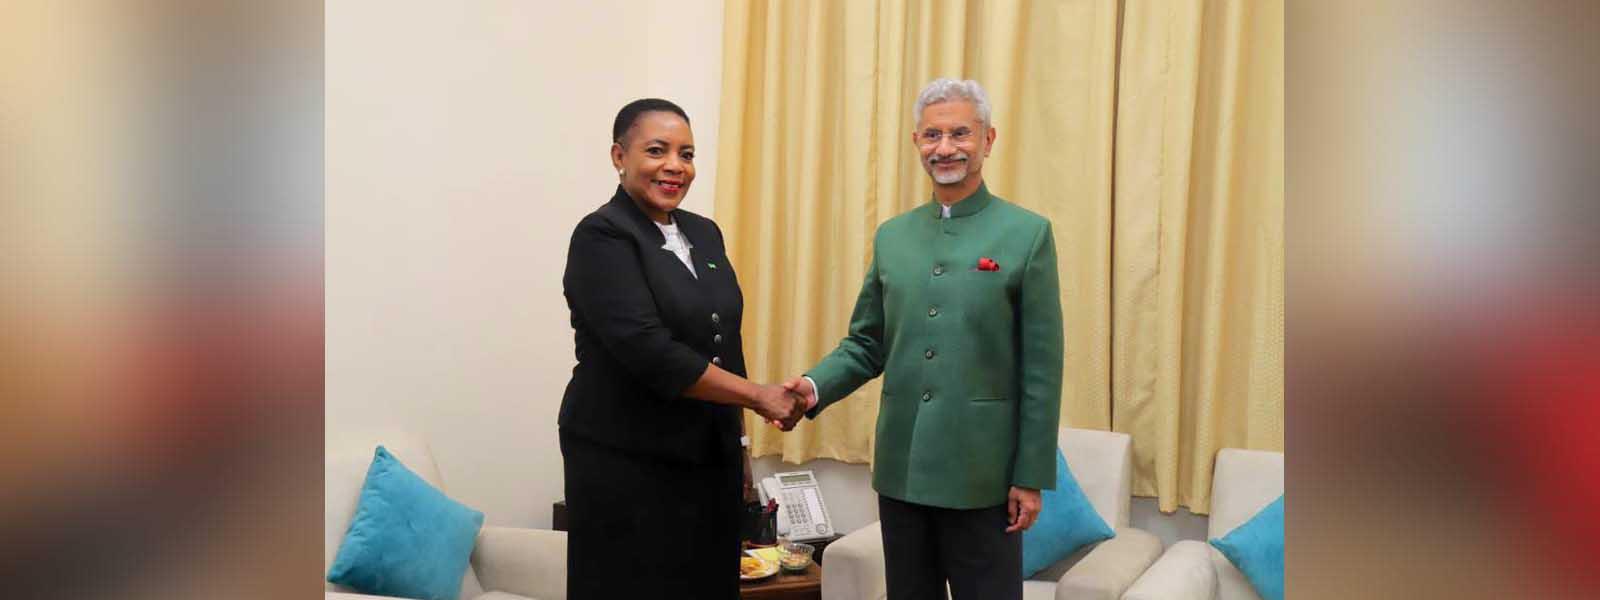 External Affairs Minister Dr. S. Jaishankar met H. E. Ms. Nelly Mutti, Speaker of National Assembly of Zambia in Parliament House